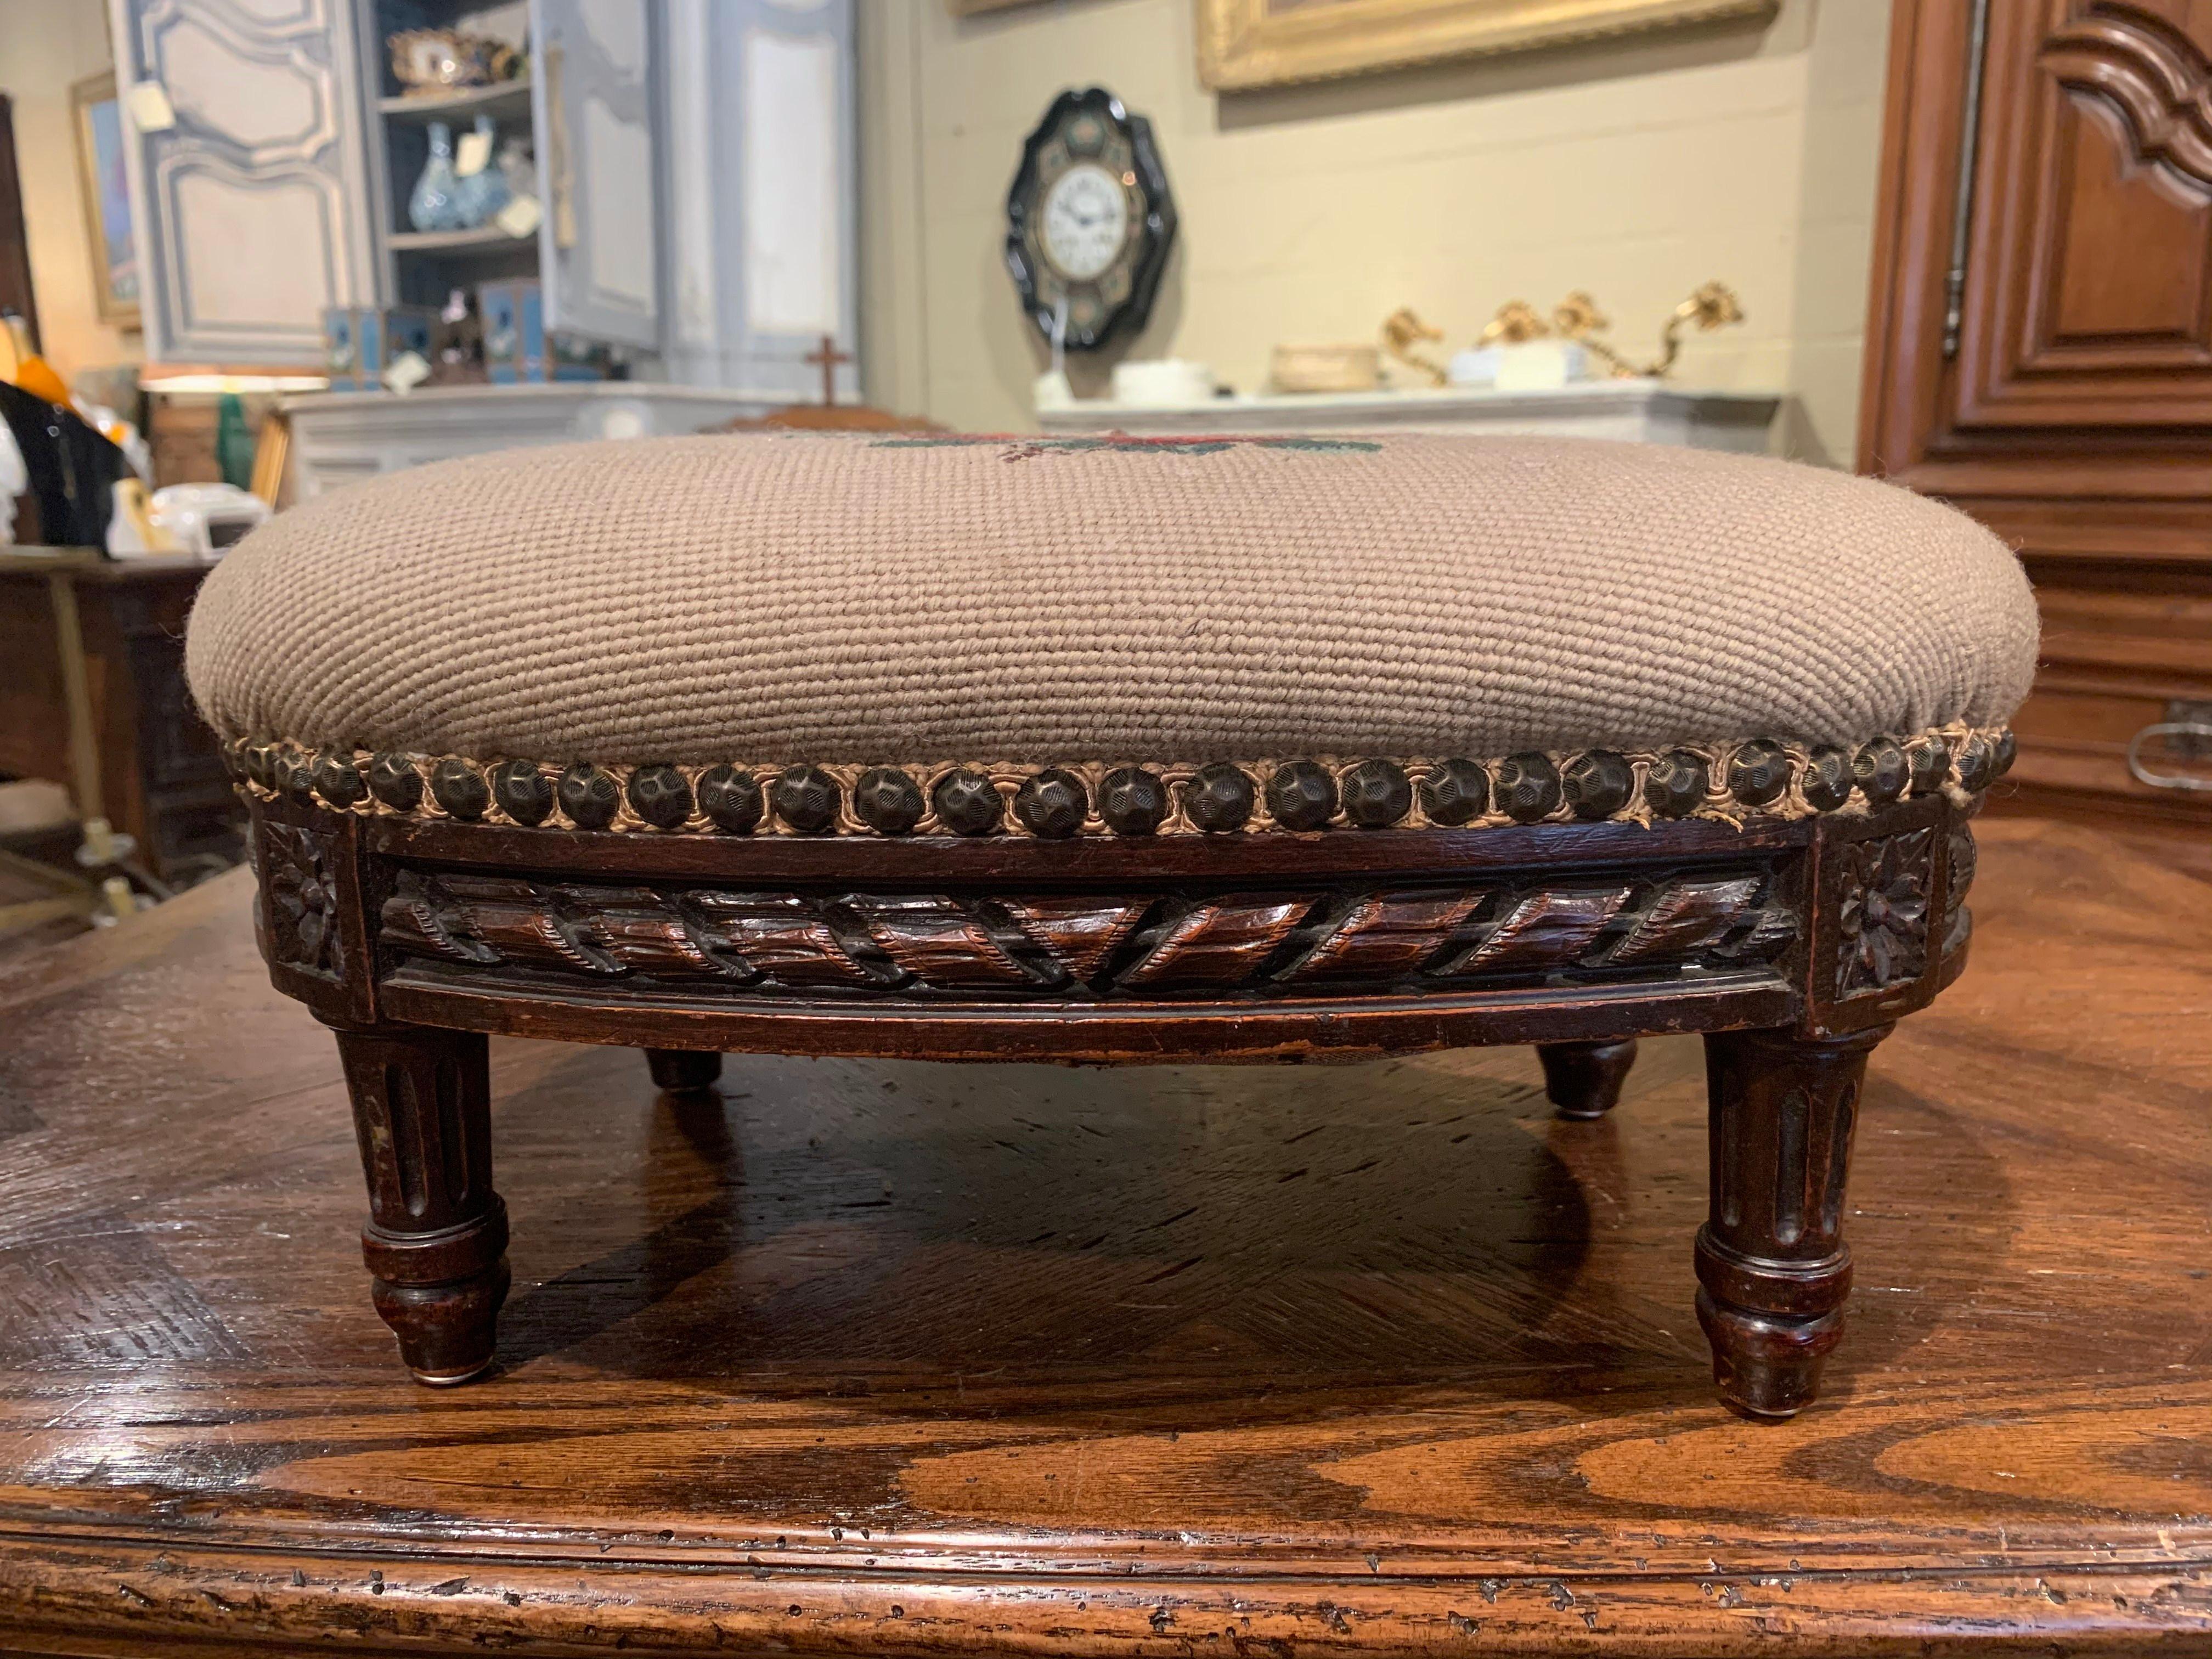 Put your feet up with style and comfort with this elegant Louis XVI foot stool. Crafted in France circa 1920 and oval in shape, the antique stool stands on tapered legs over a carved apron decorated with rosette medallions in each rounded corner.